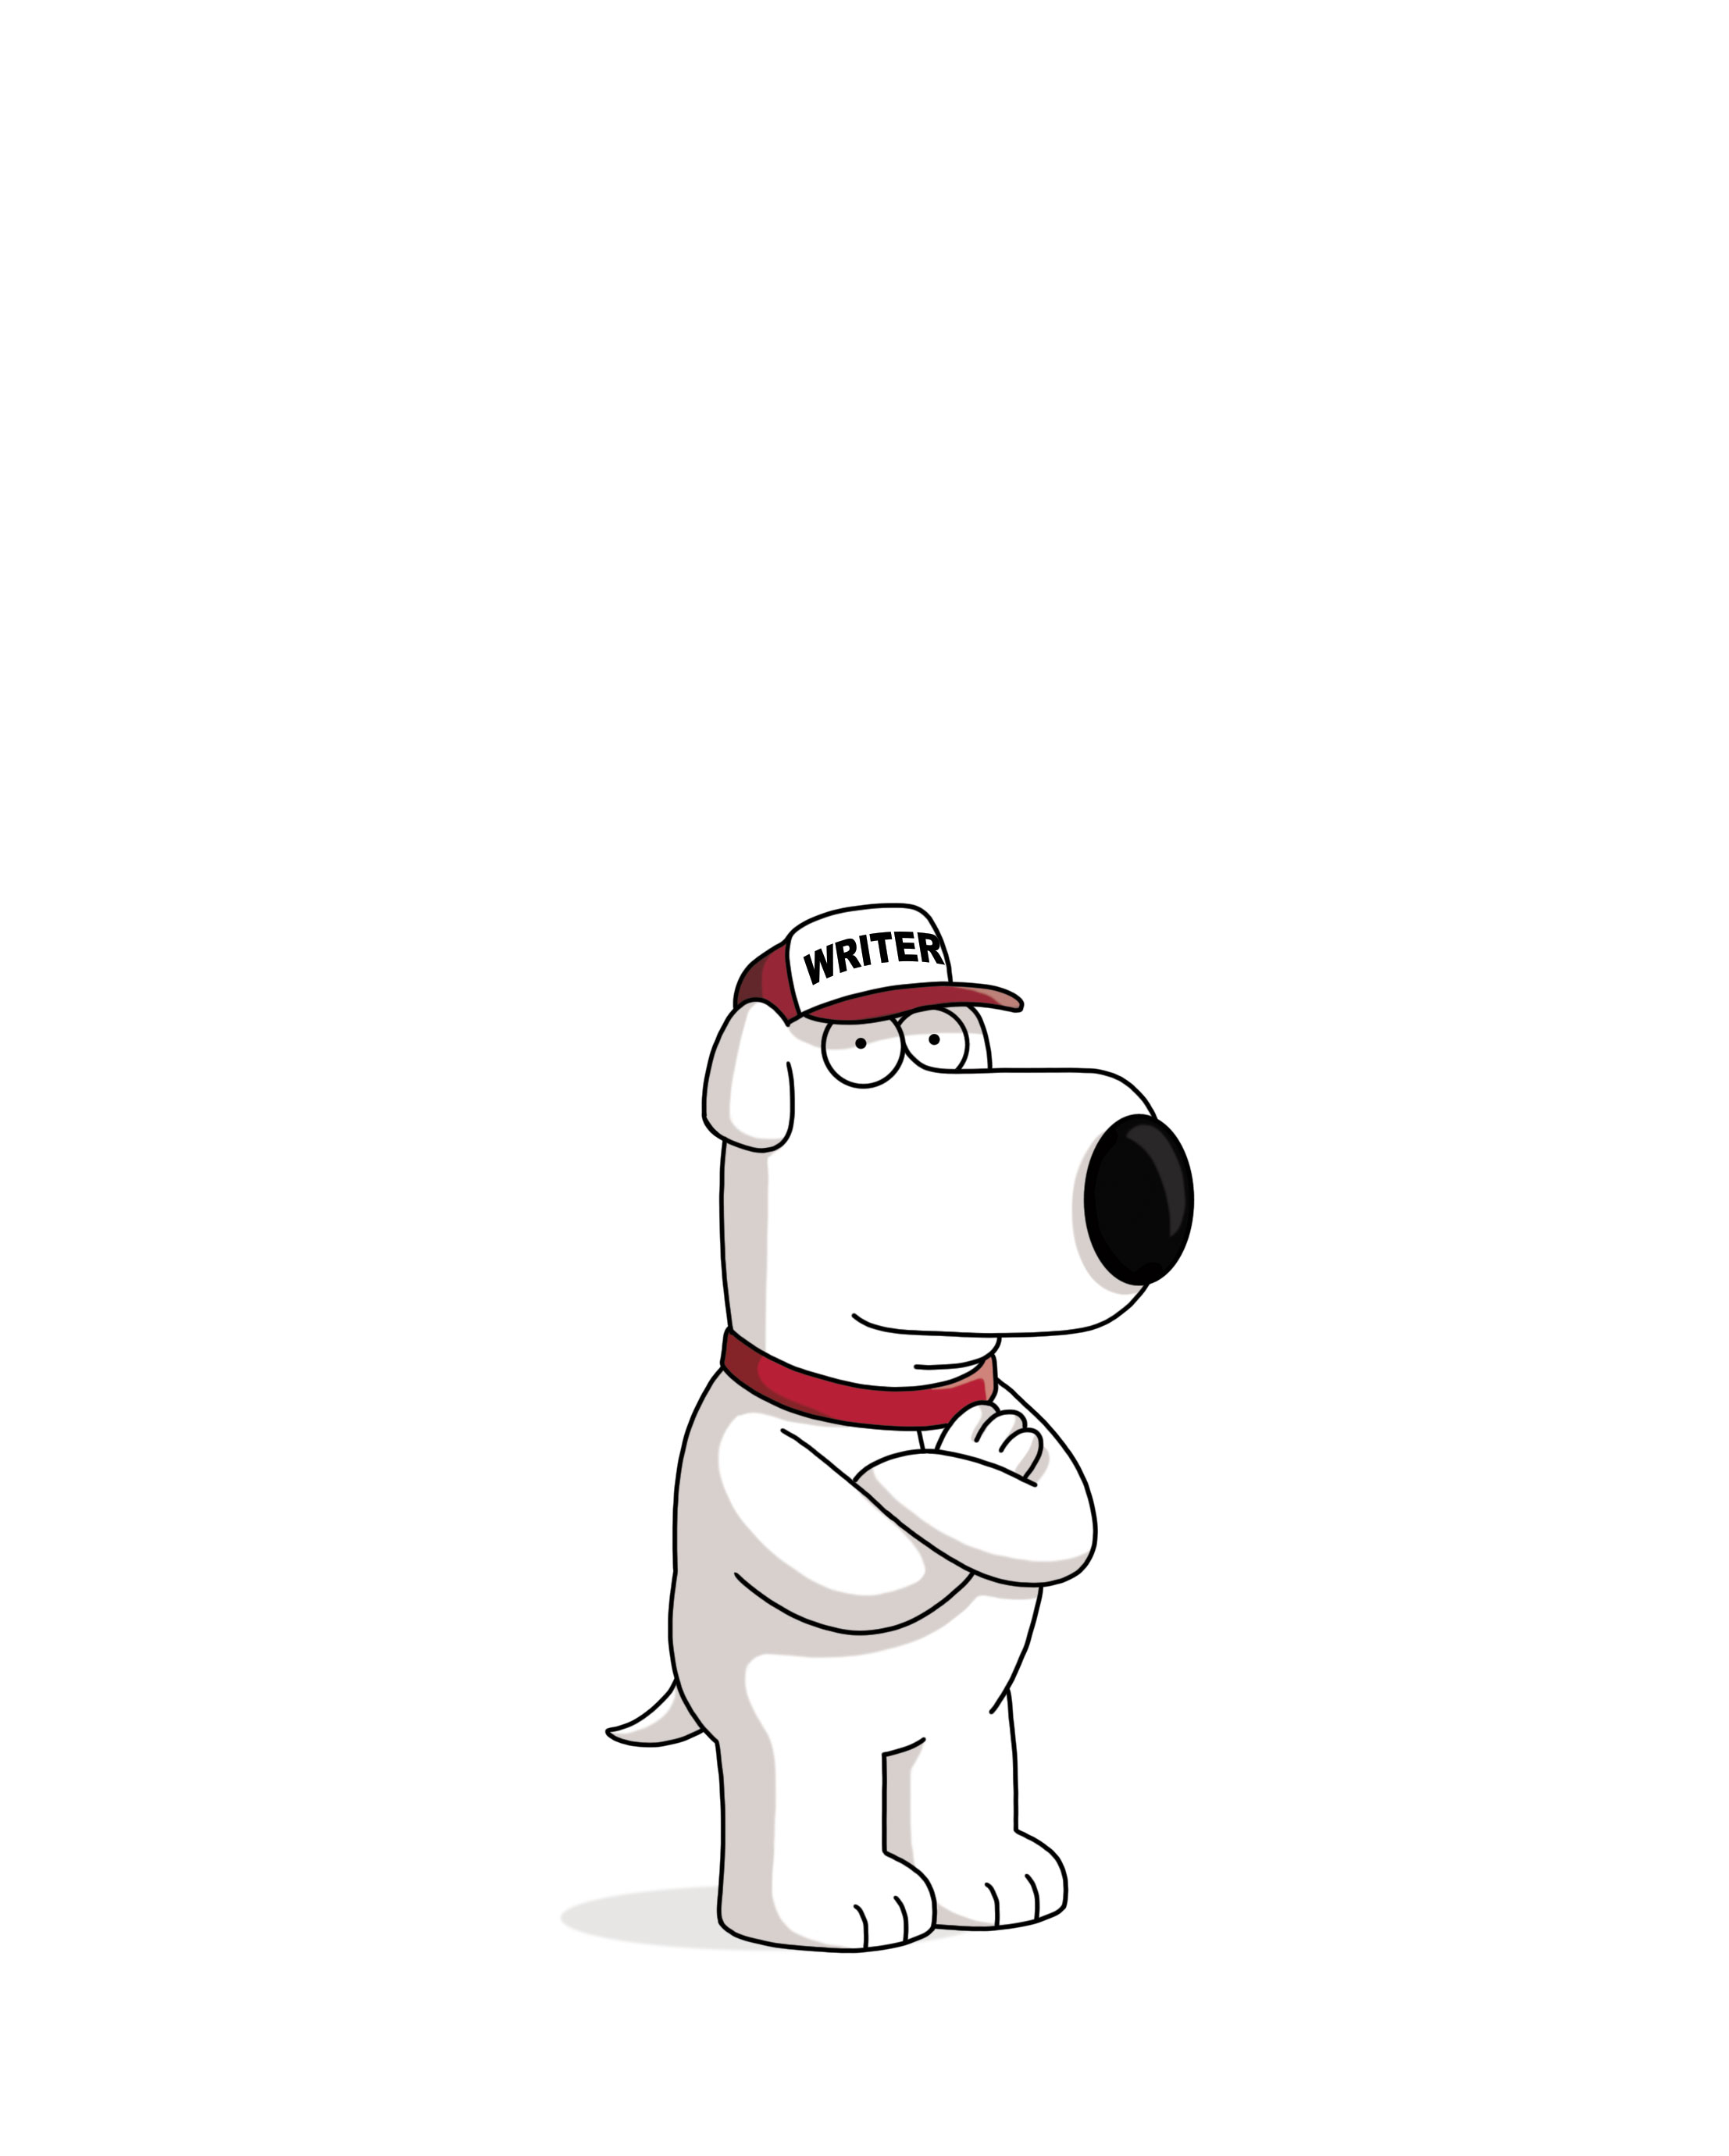 dogs name from family guy